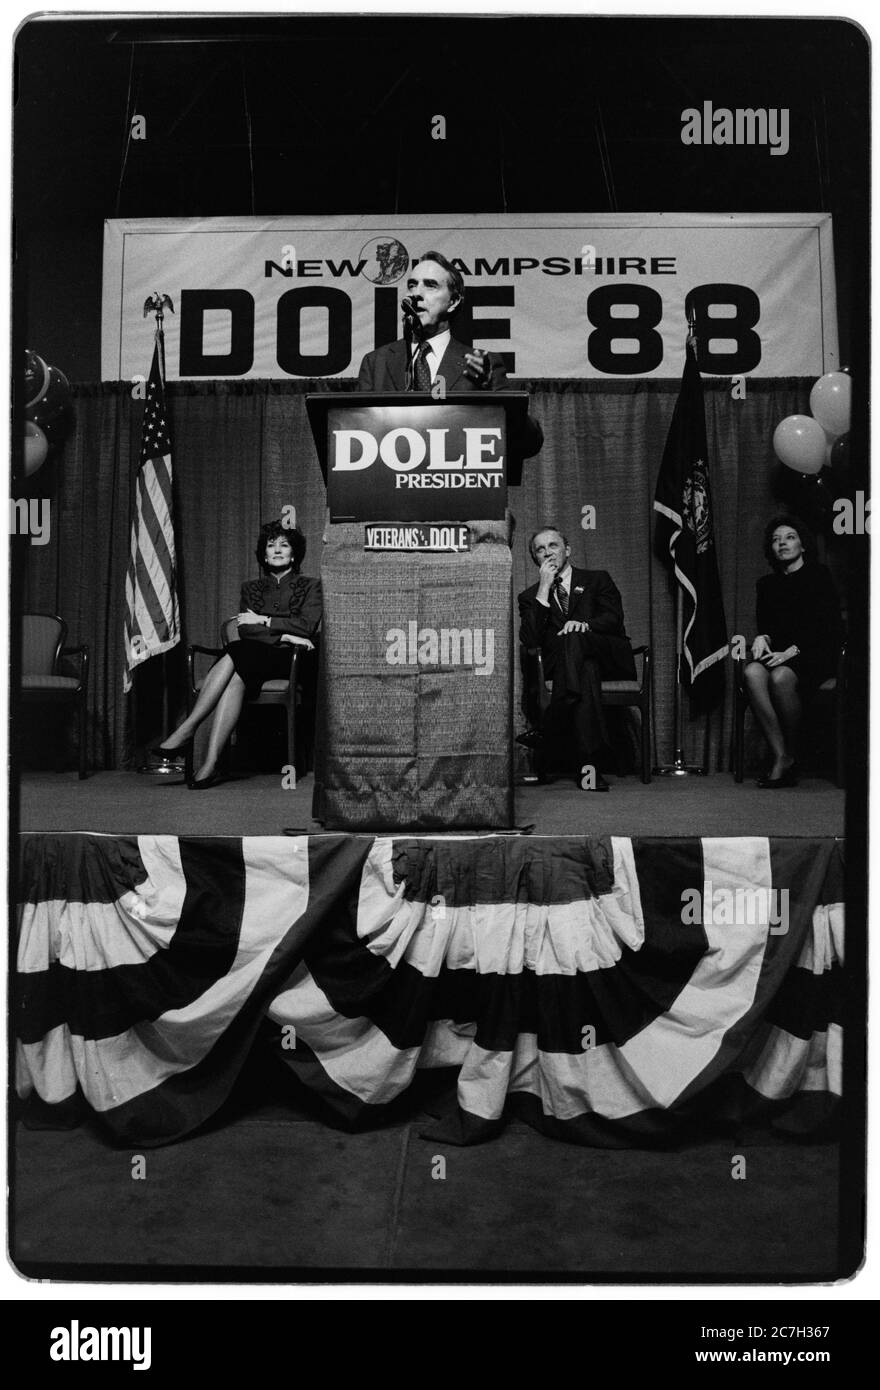 US Presidential Election Campaign 1988 Bob Dole Republican candidate on the campaign trail during the New Hampshire Primaries in February 1988 Robert Joseph Dole (born July 22, 1923) is an American retired politician, statesman,[3] and attorney who represented Kansas in the U.S House of Representatives from 1961 to 1969 and in the U.S. Senate from 1969 to 1996, serving as the Republican Leader of the United States Senate from 1985 until 1996. He was the Republican presidential nominee in the 1996 election and the party's vice presidential nominee in the 1976 election. Stock Photo